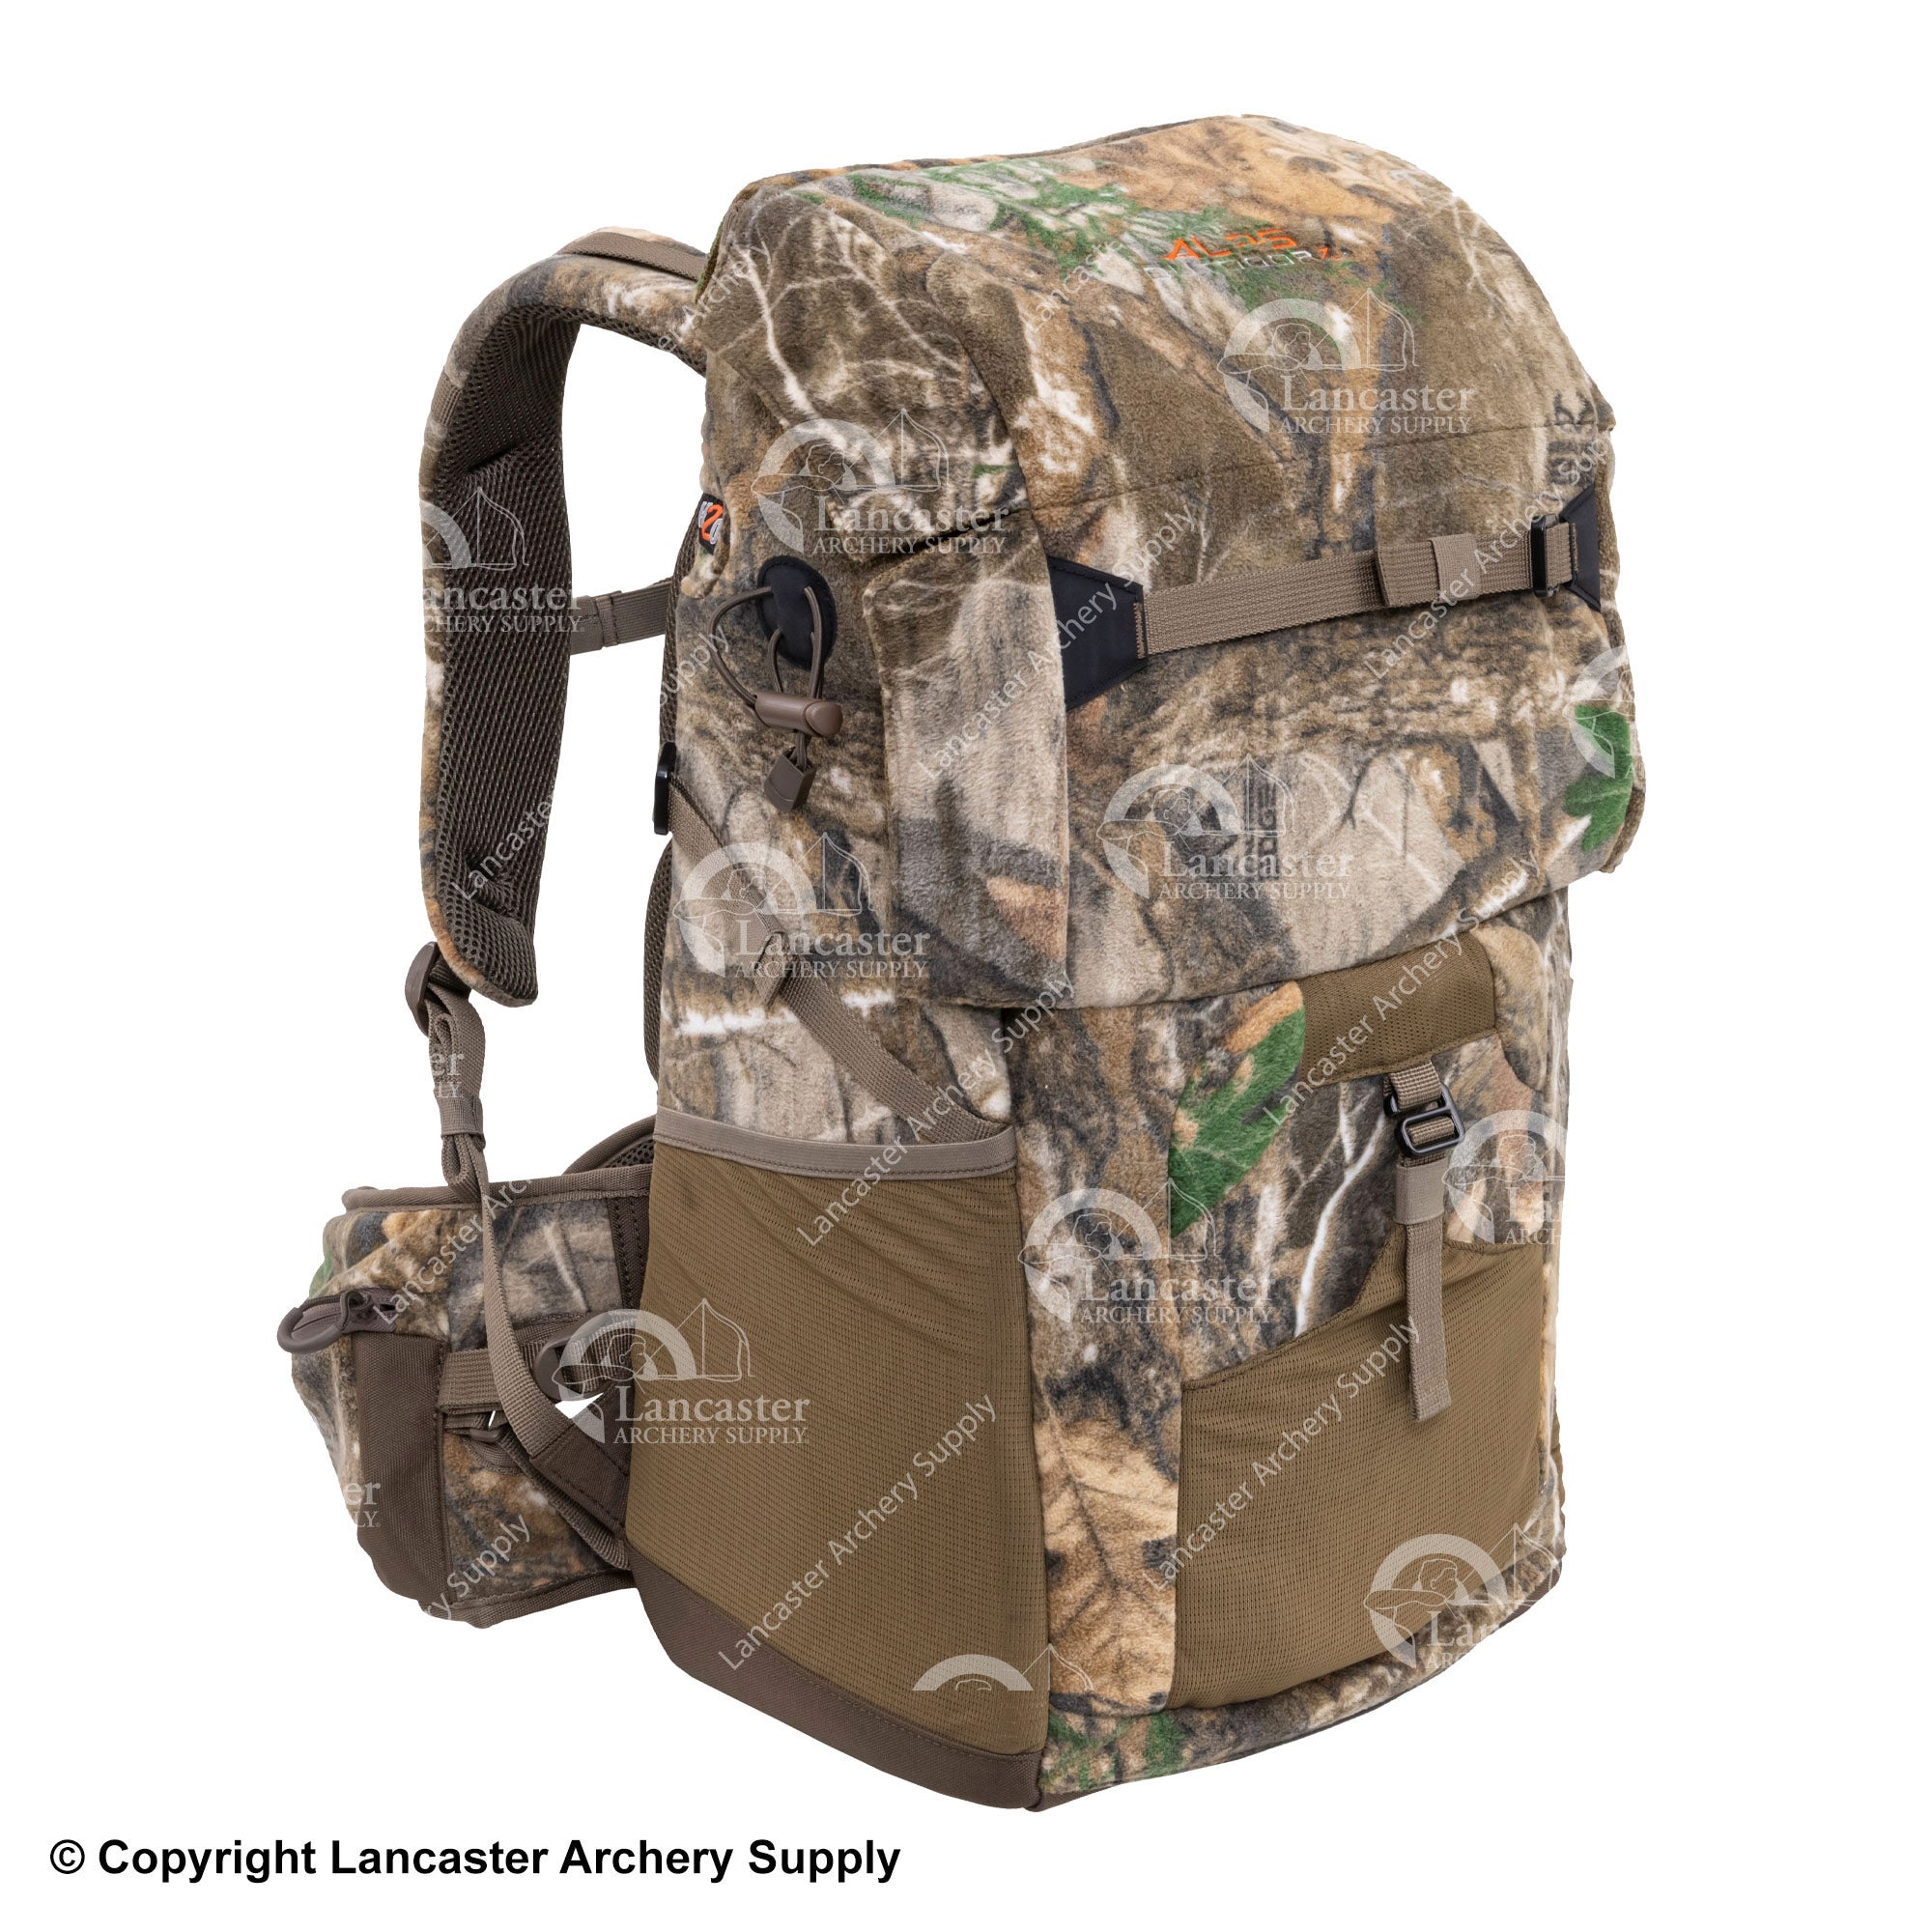 Alps OutdoorZ Impulse Hunting Backpack